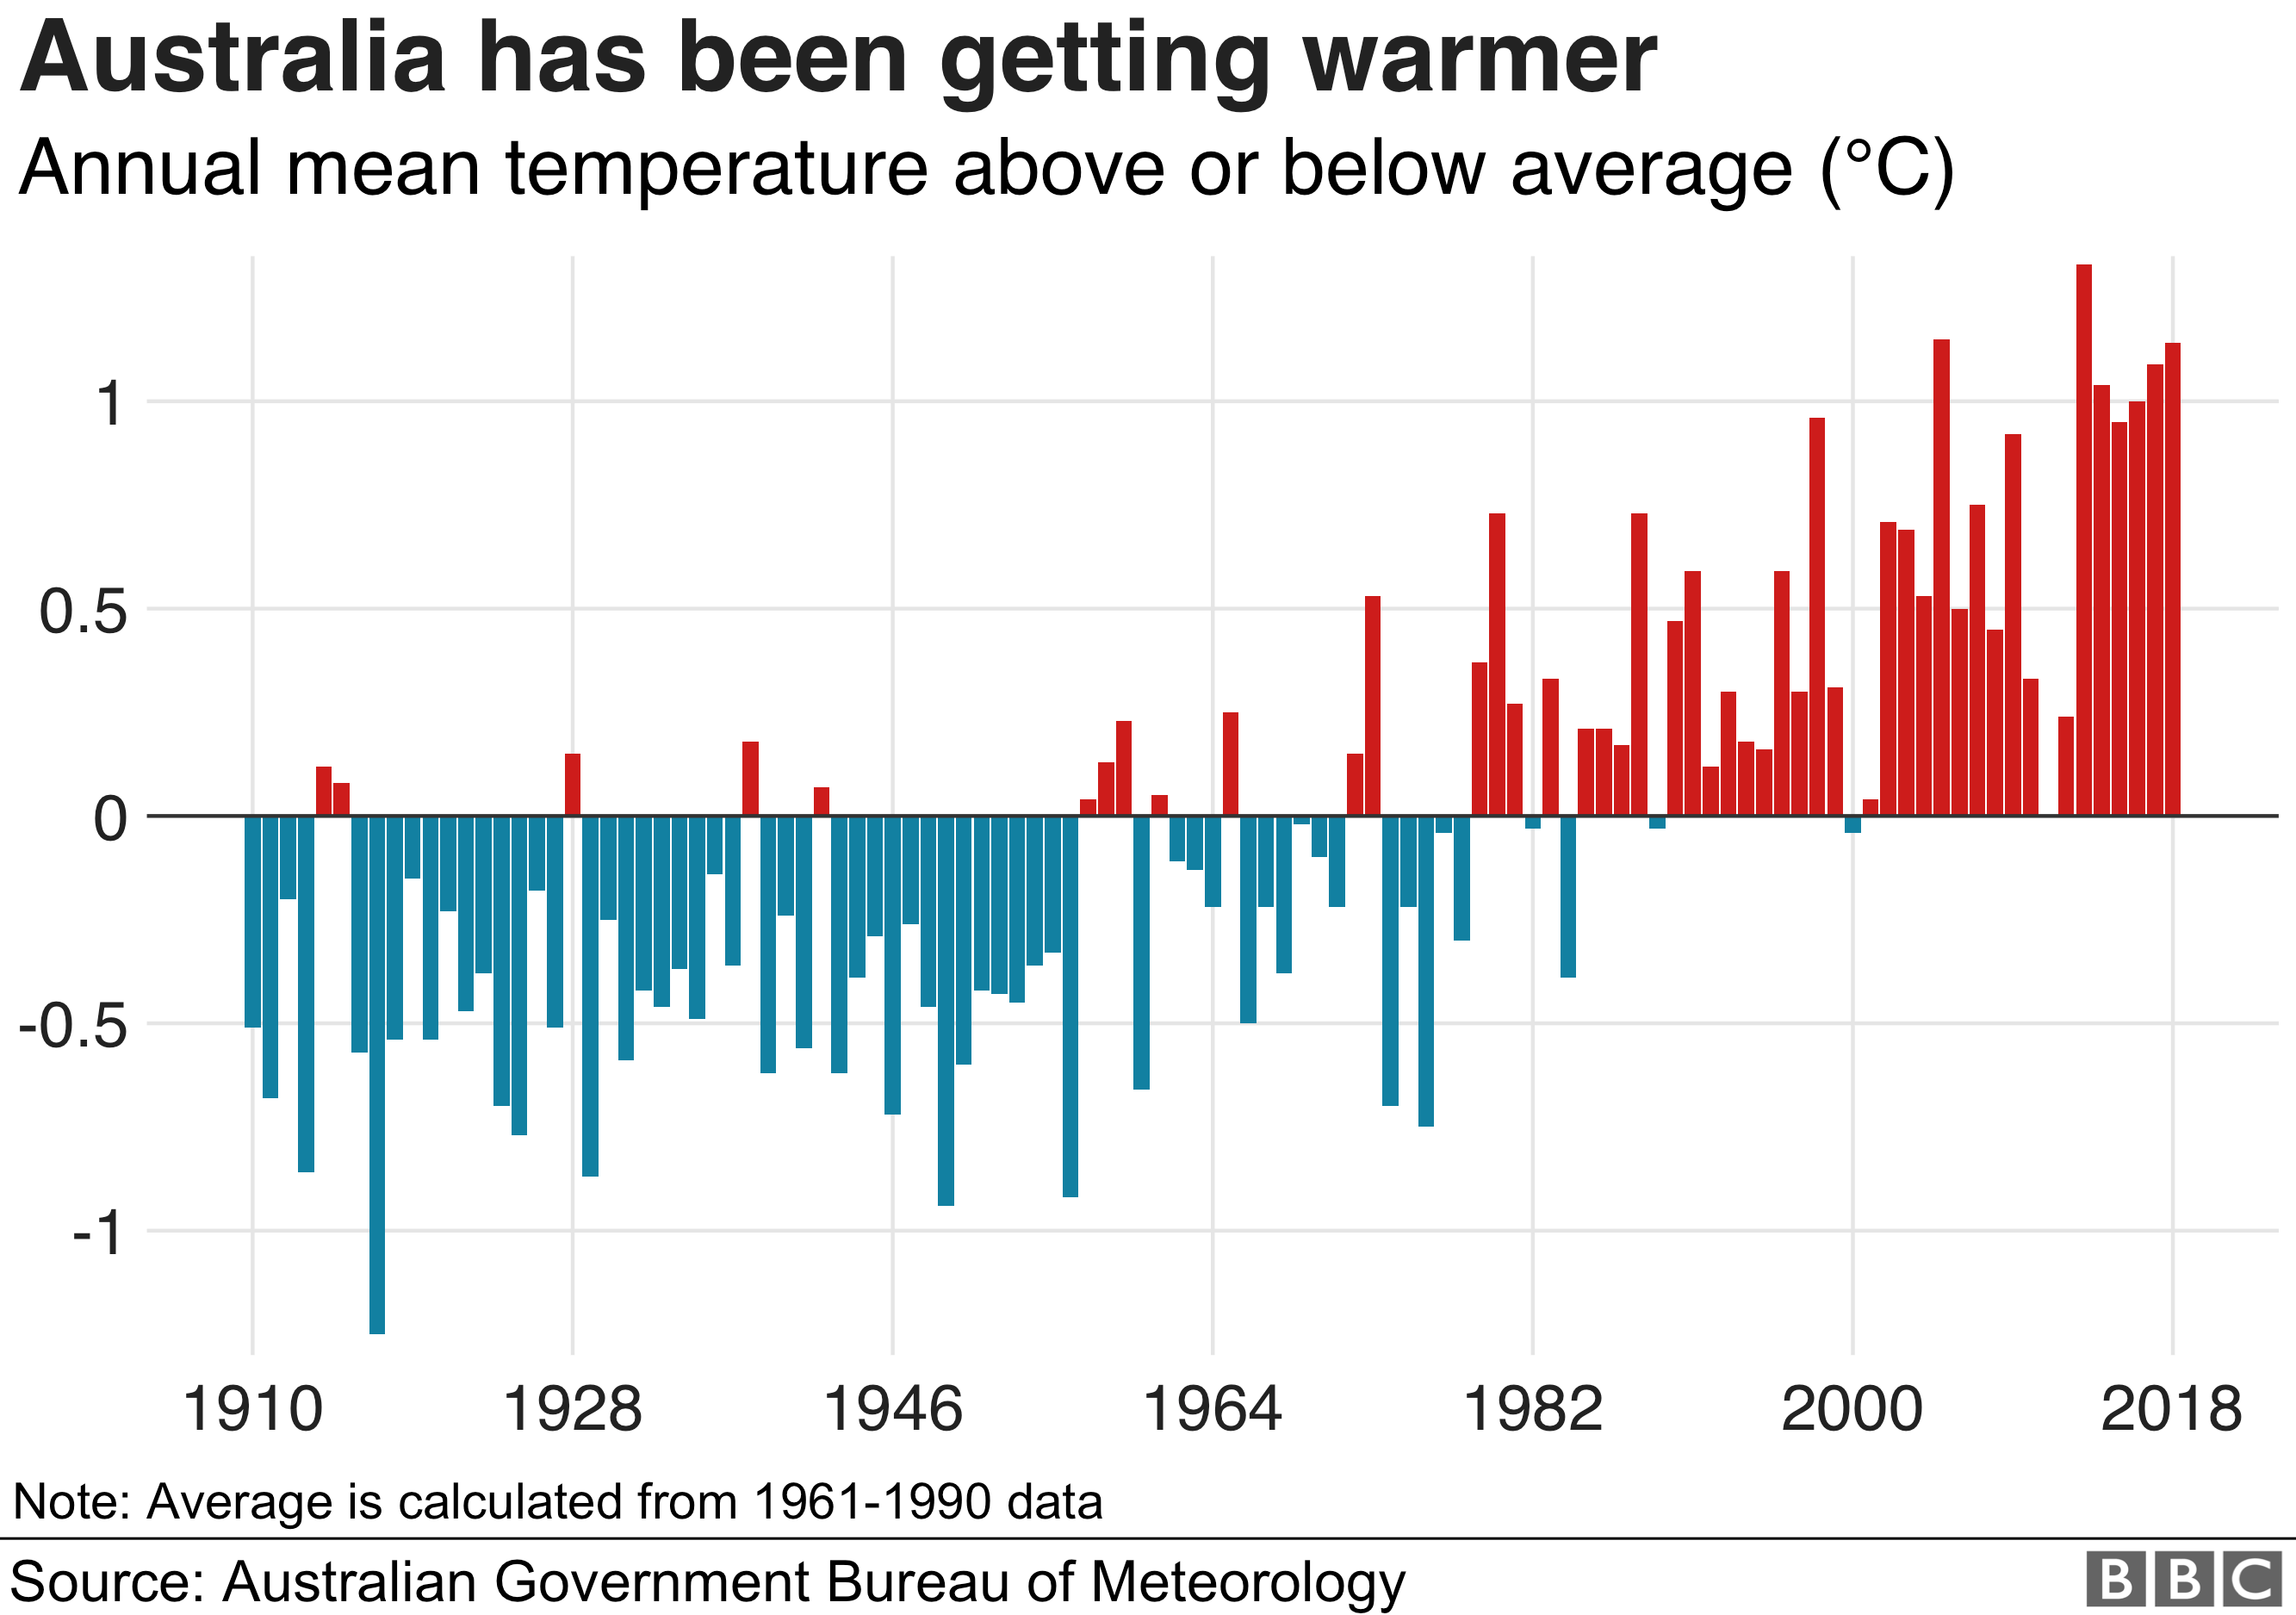 Chart showing how Australia has been getting warmer in recent decades